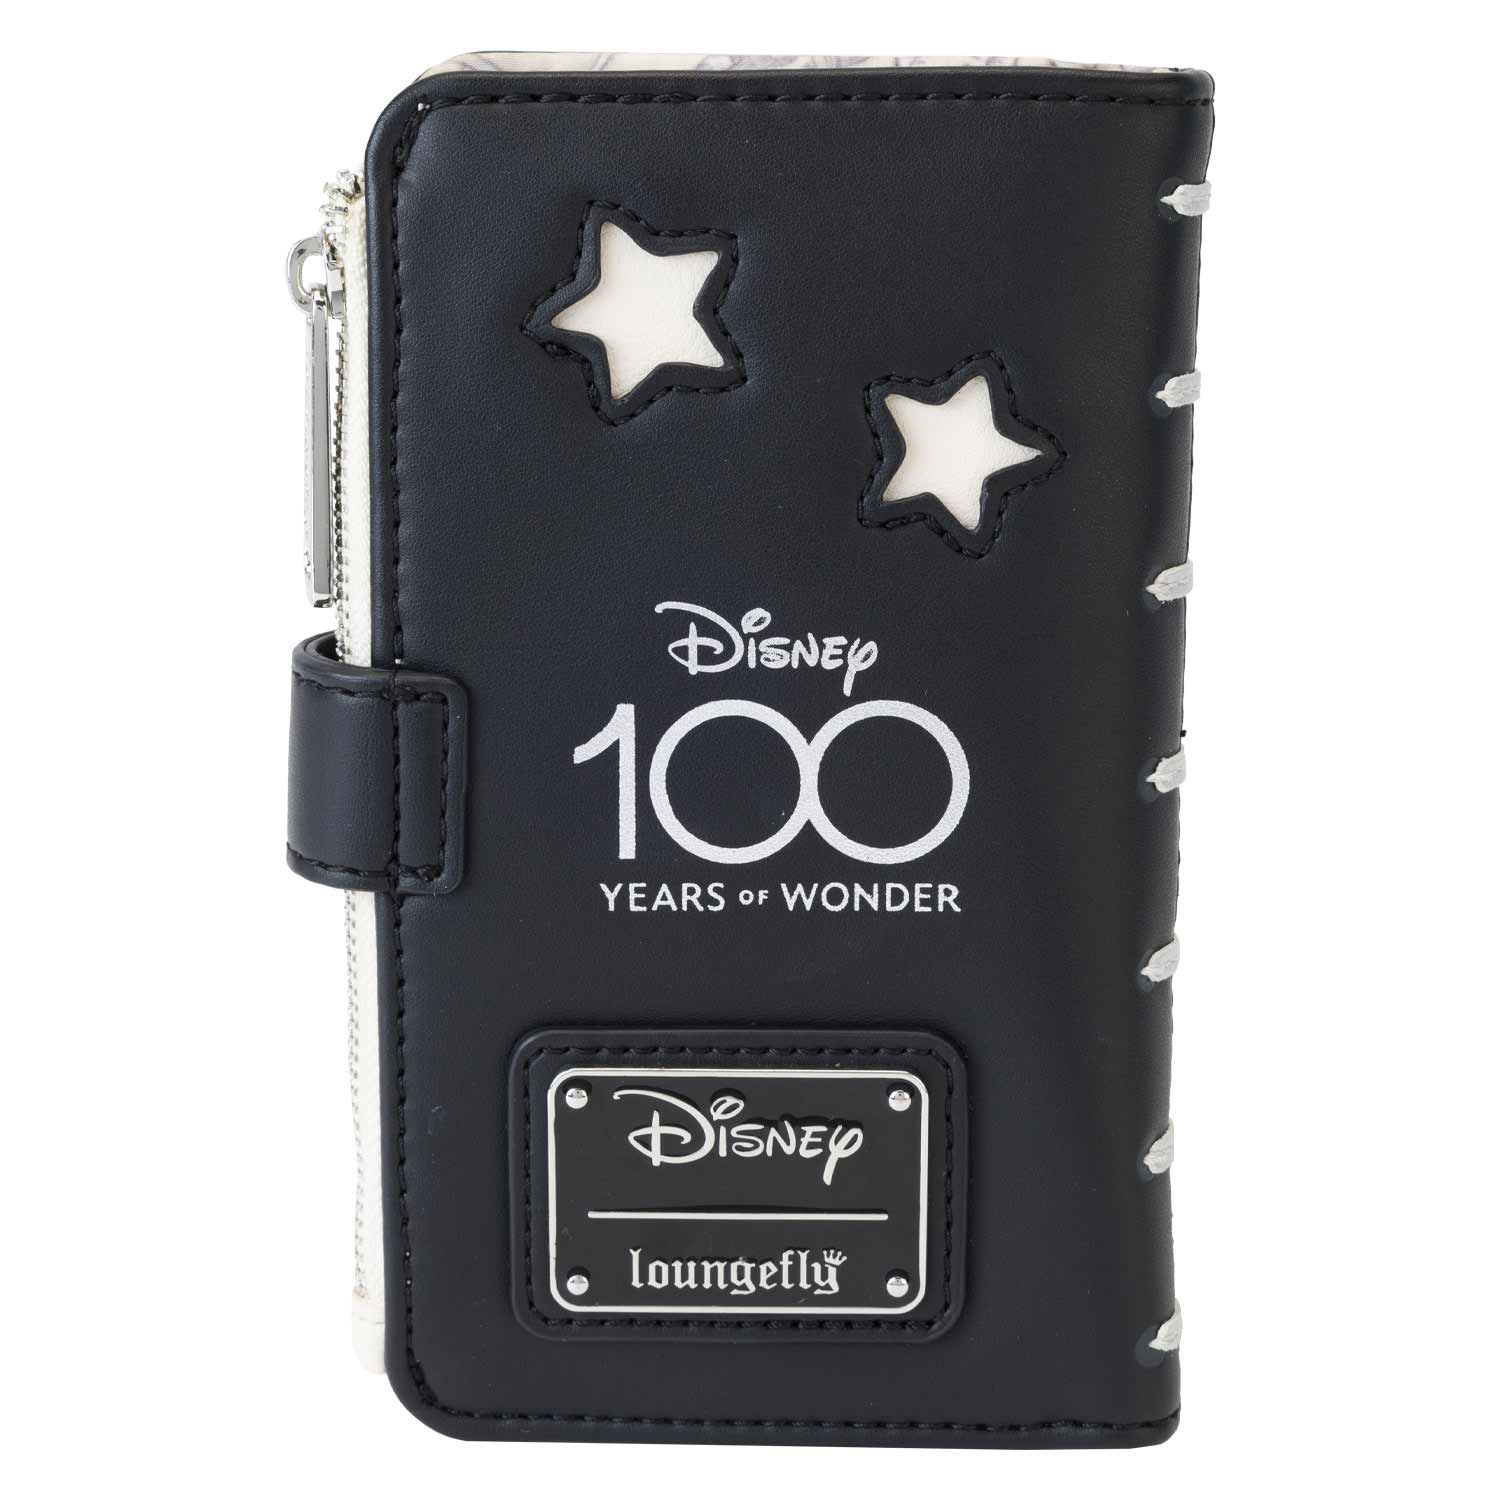 Loungefly x Disney 100th Anniversary Sketchbook Flap Wallet - GeekCore